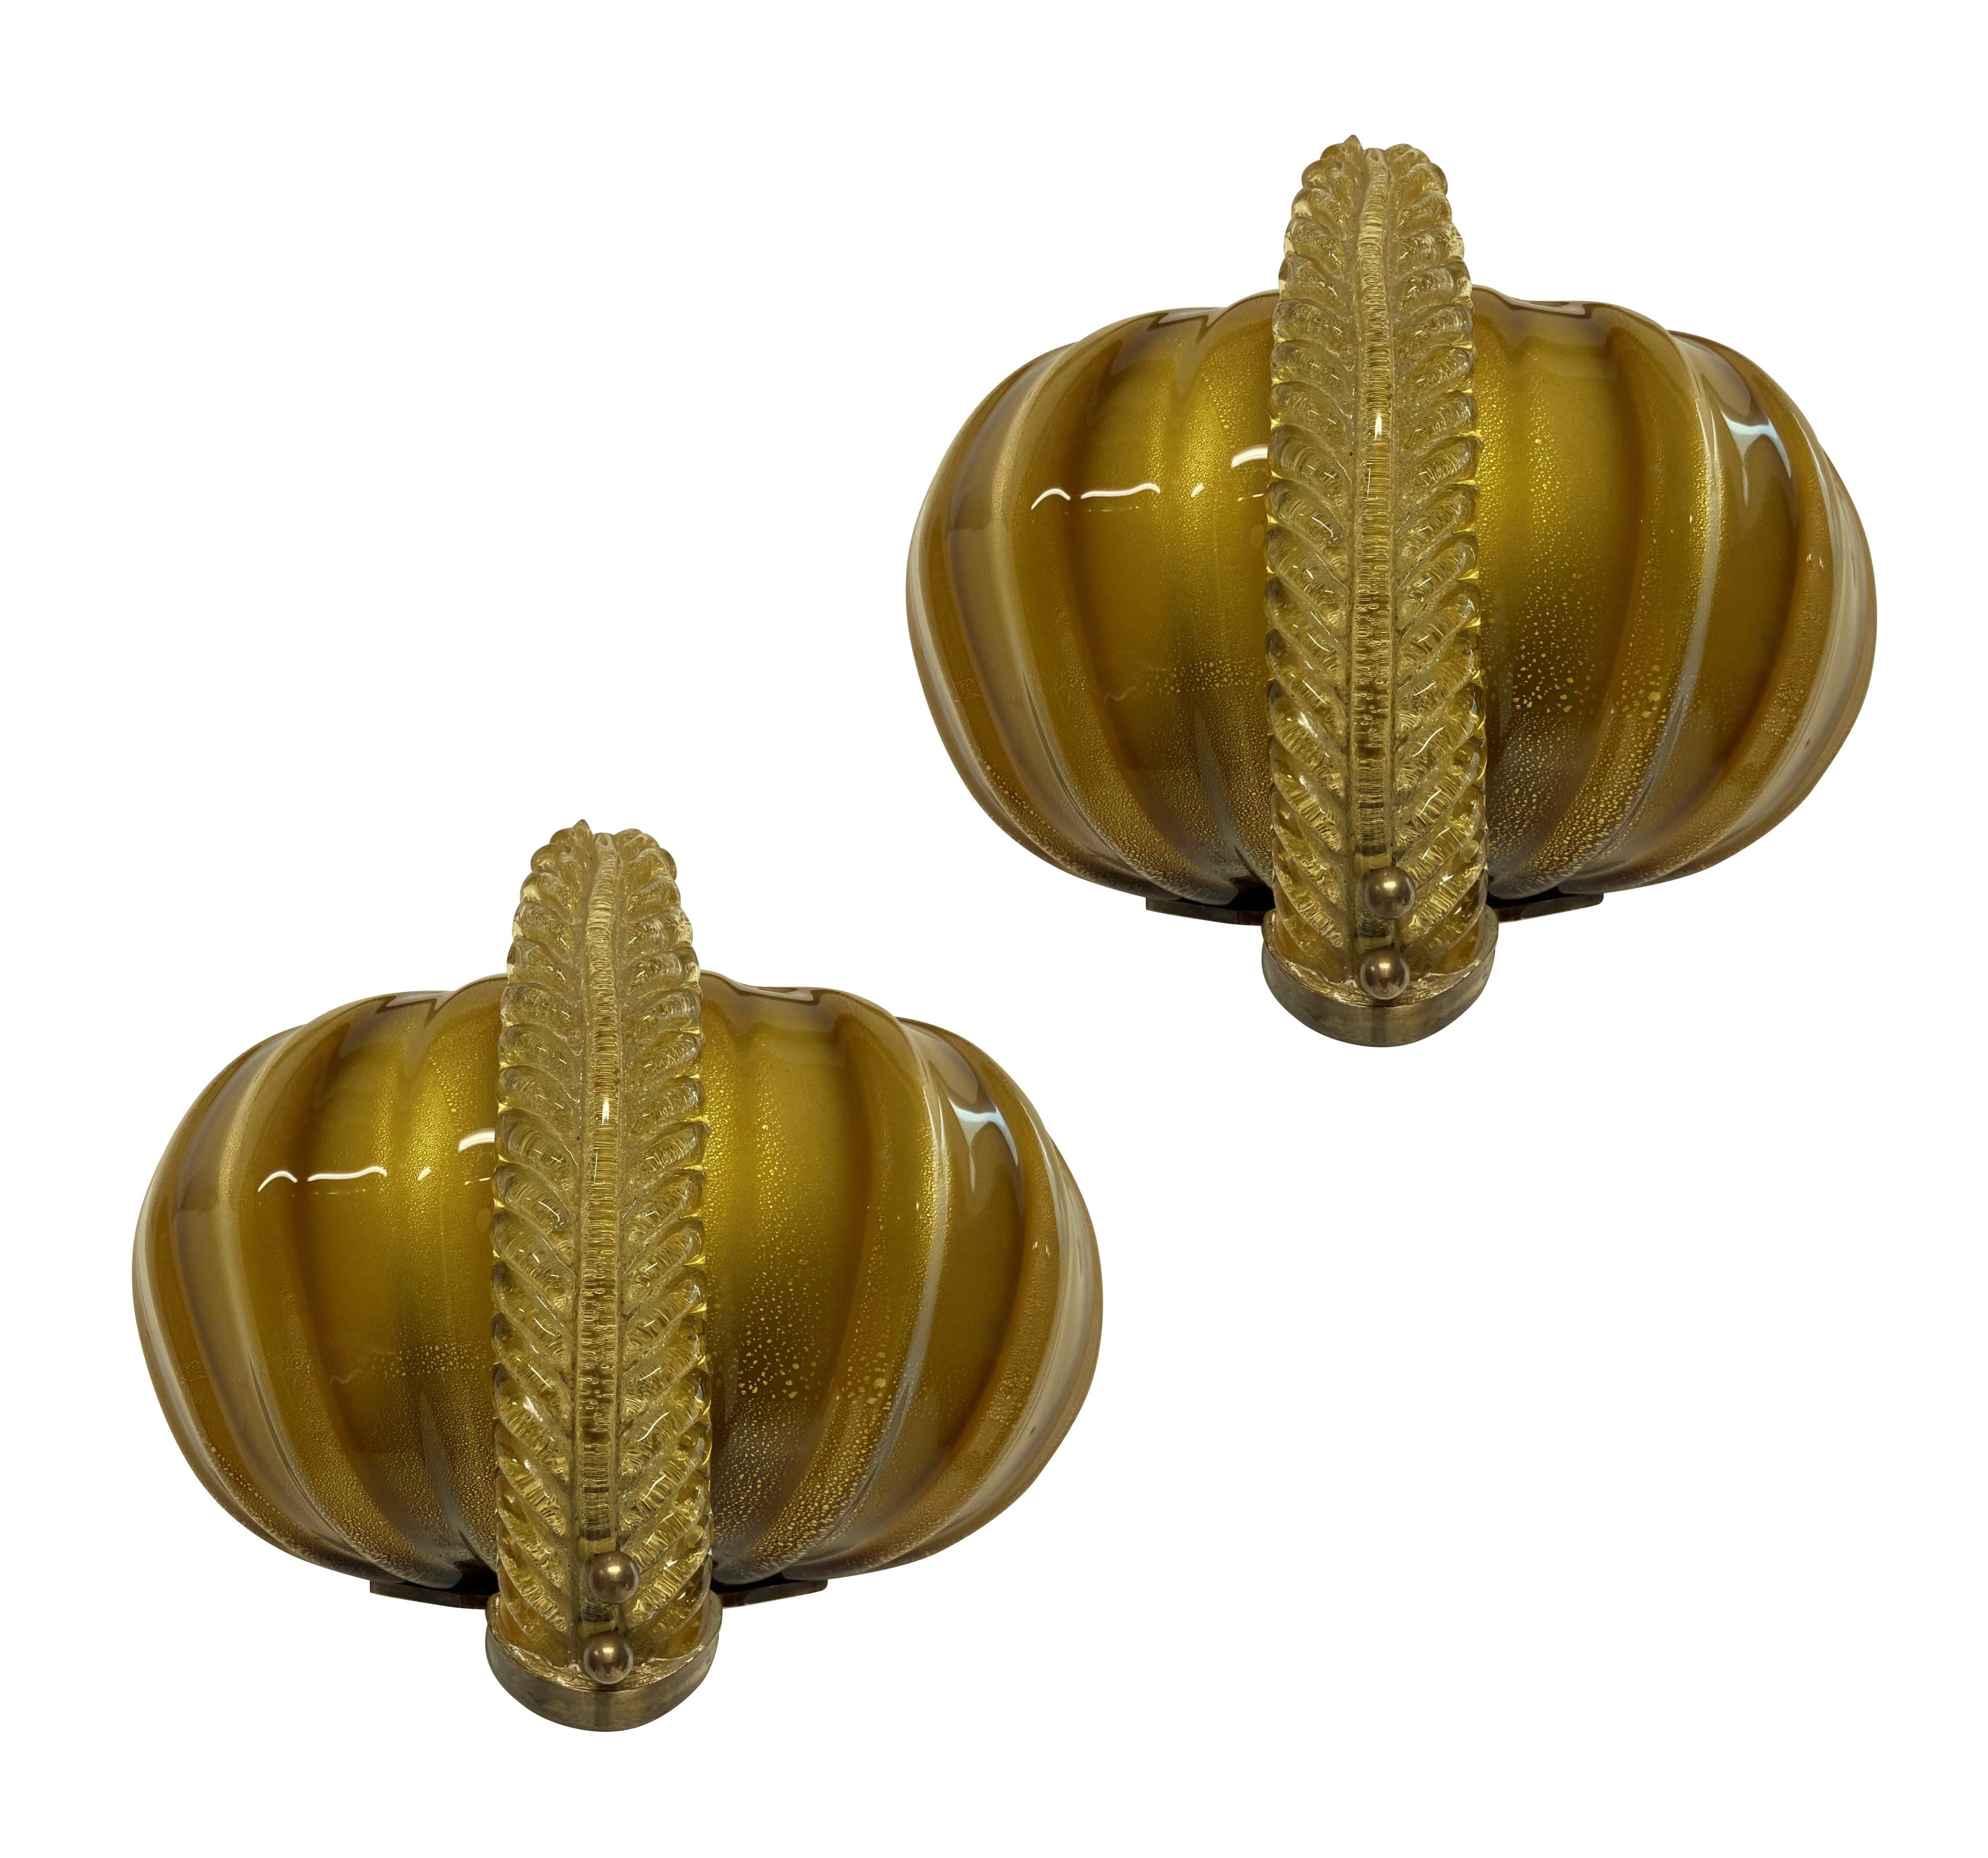 A pair of good quality Venini wall lights in hand blown gold tinted glass with brass fittings in the form of feathered turbans. En suite with another pair.